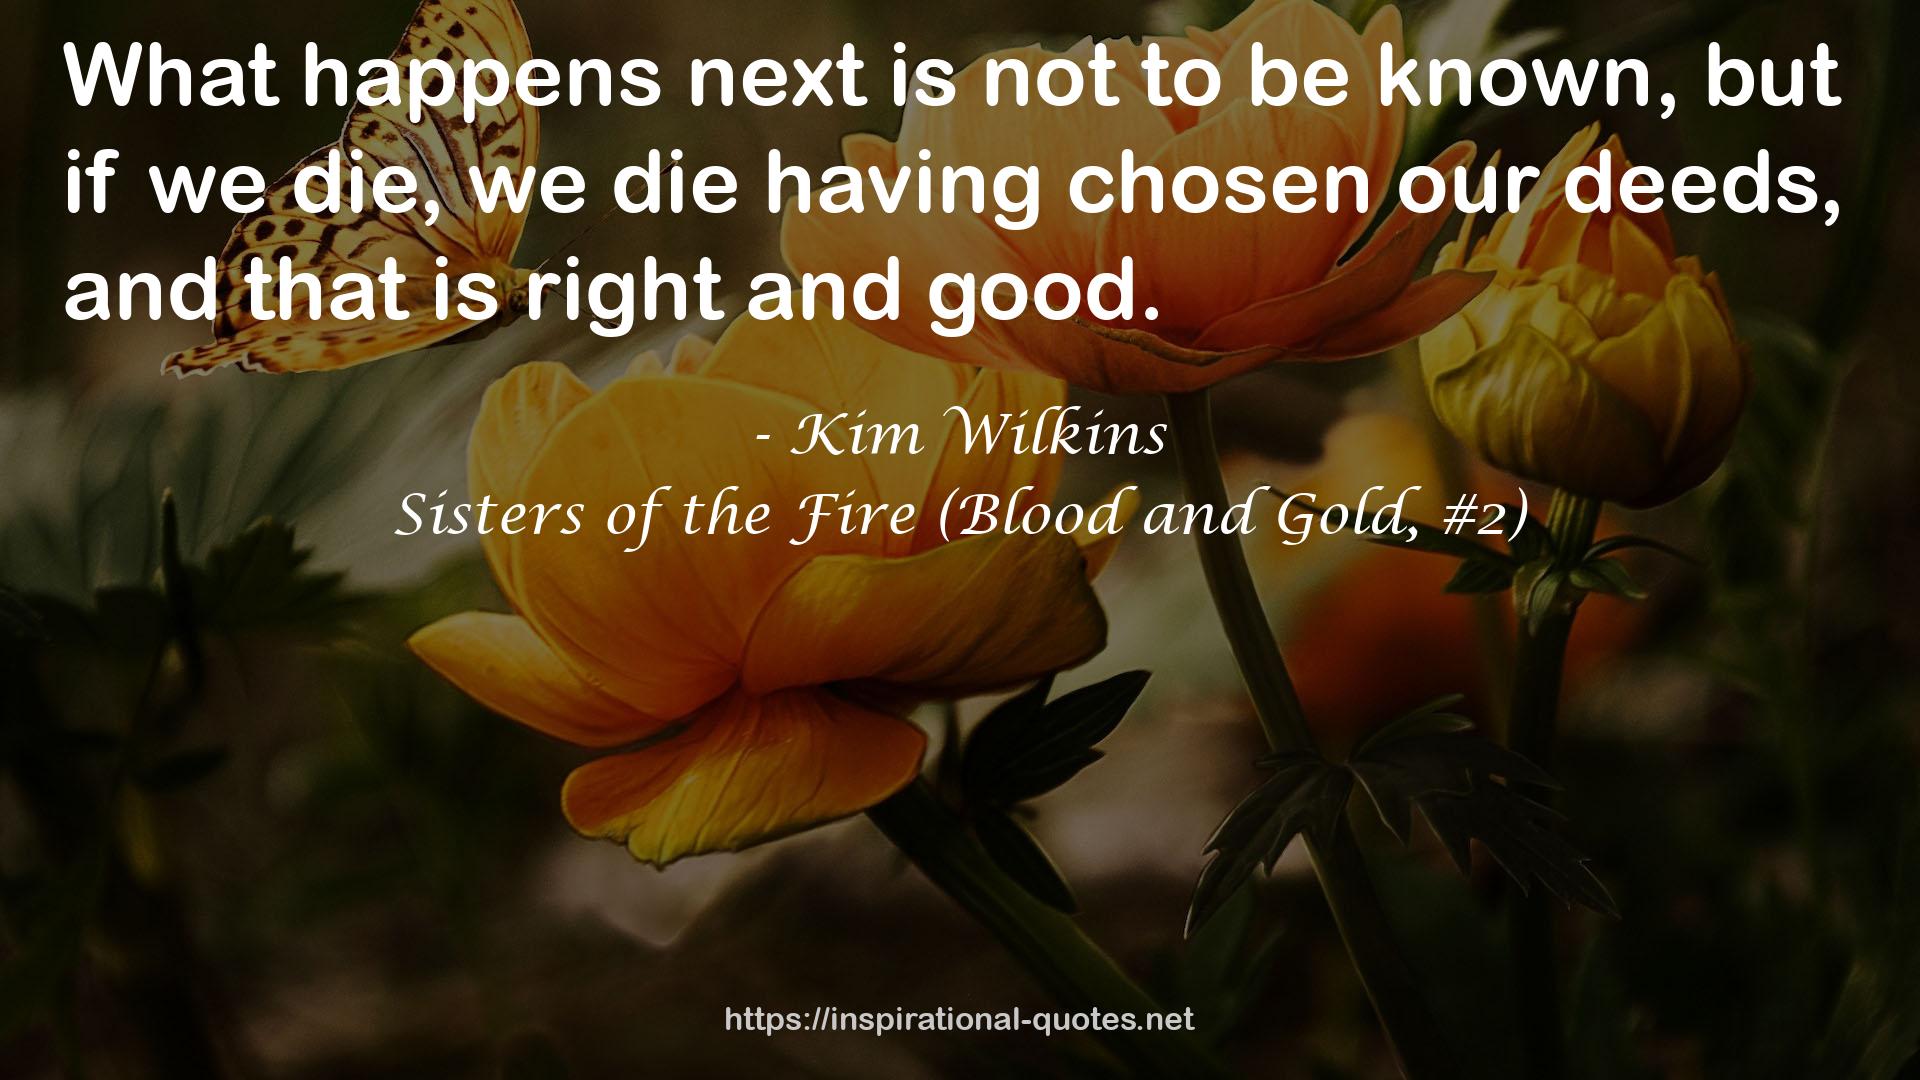 Sisters of the Fire (Blood and Gold, #2) QUOTES